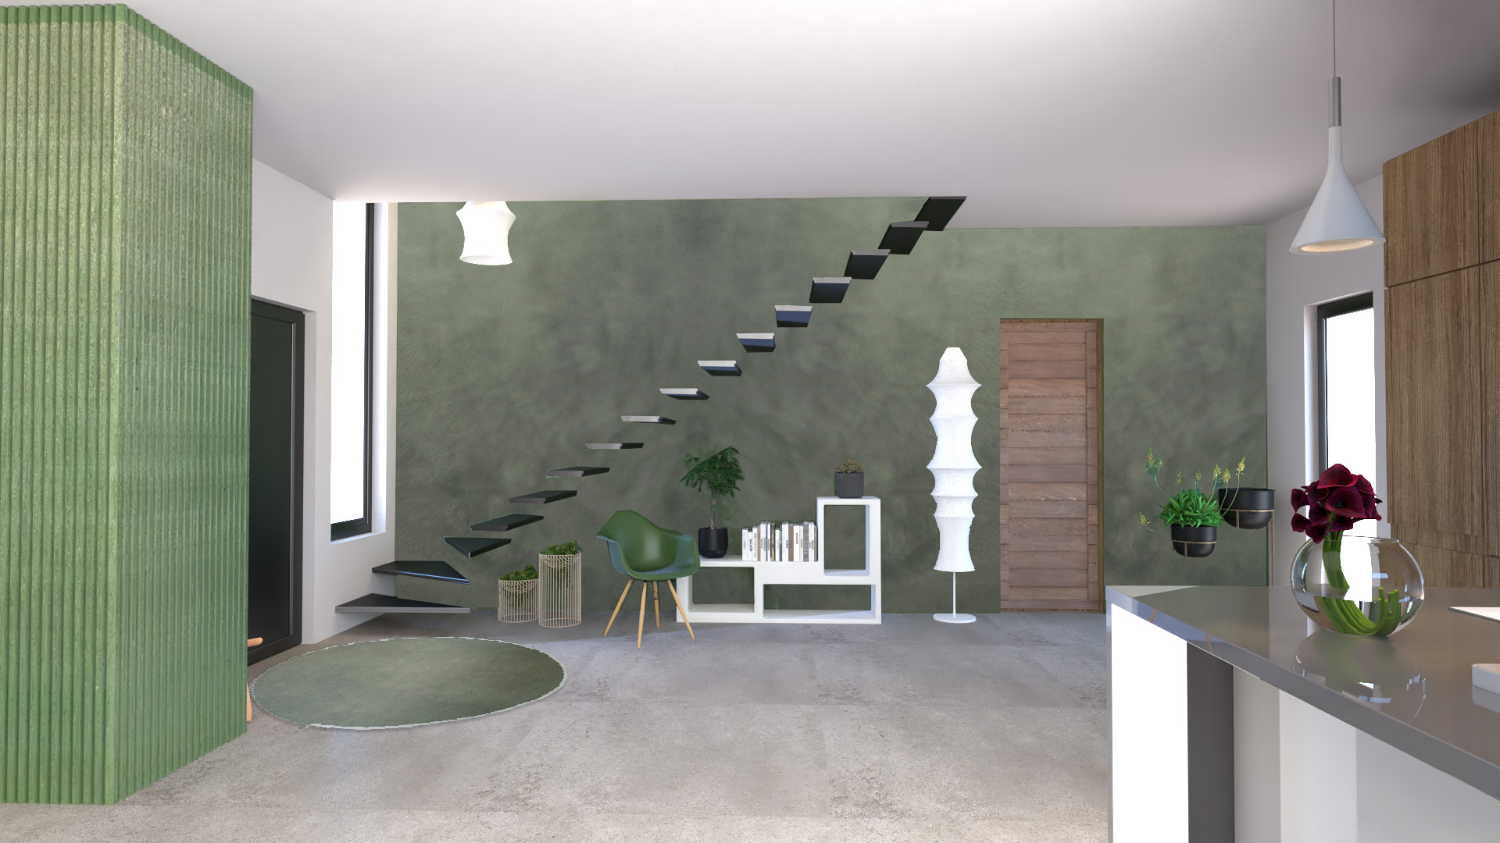 Photorealistic view of the hallway and staircase wall covered with a Marmorino lime finish; project by Elles Interior Design.